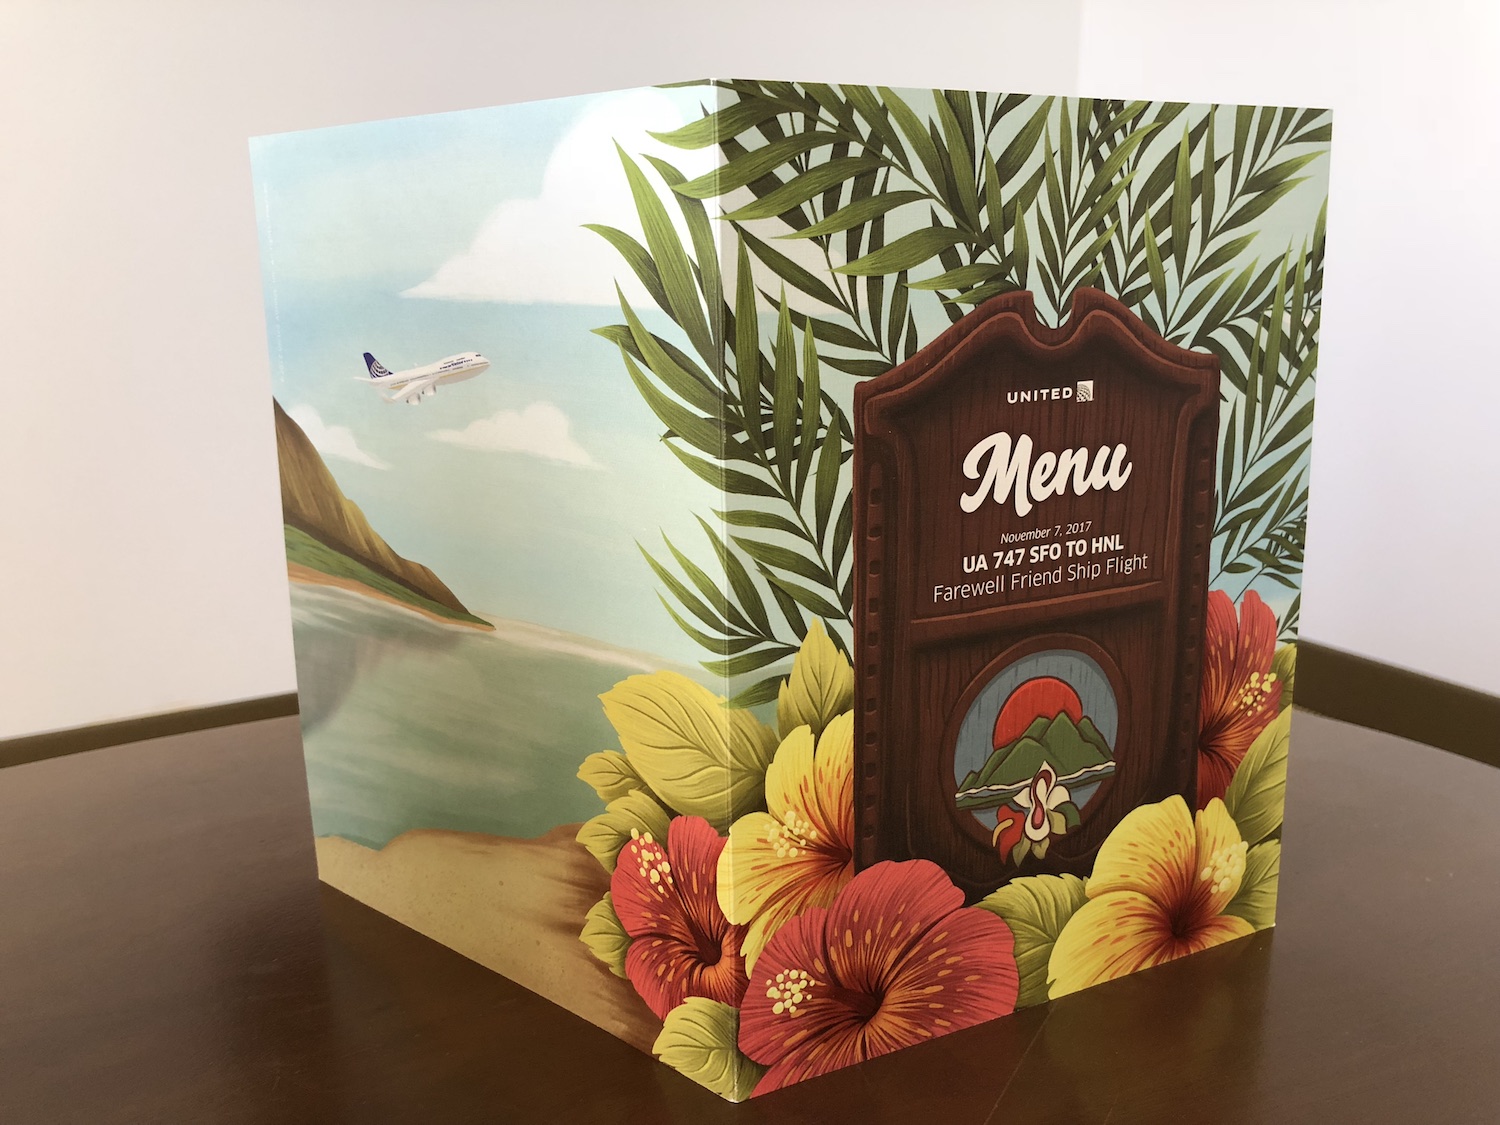 a menu box with flowers and leaves on it